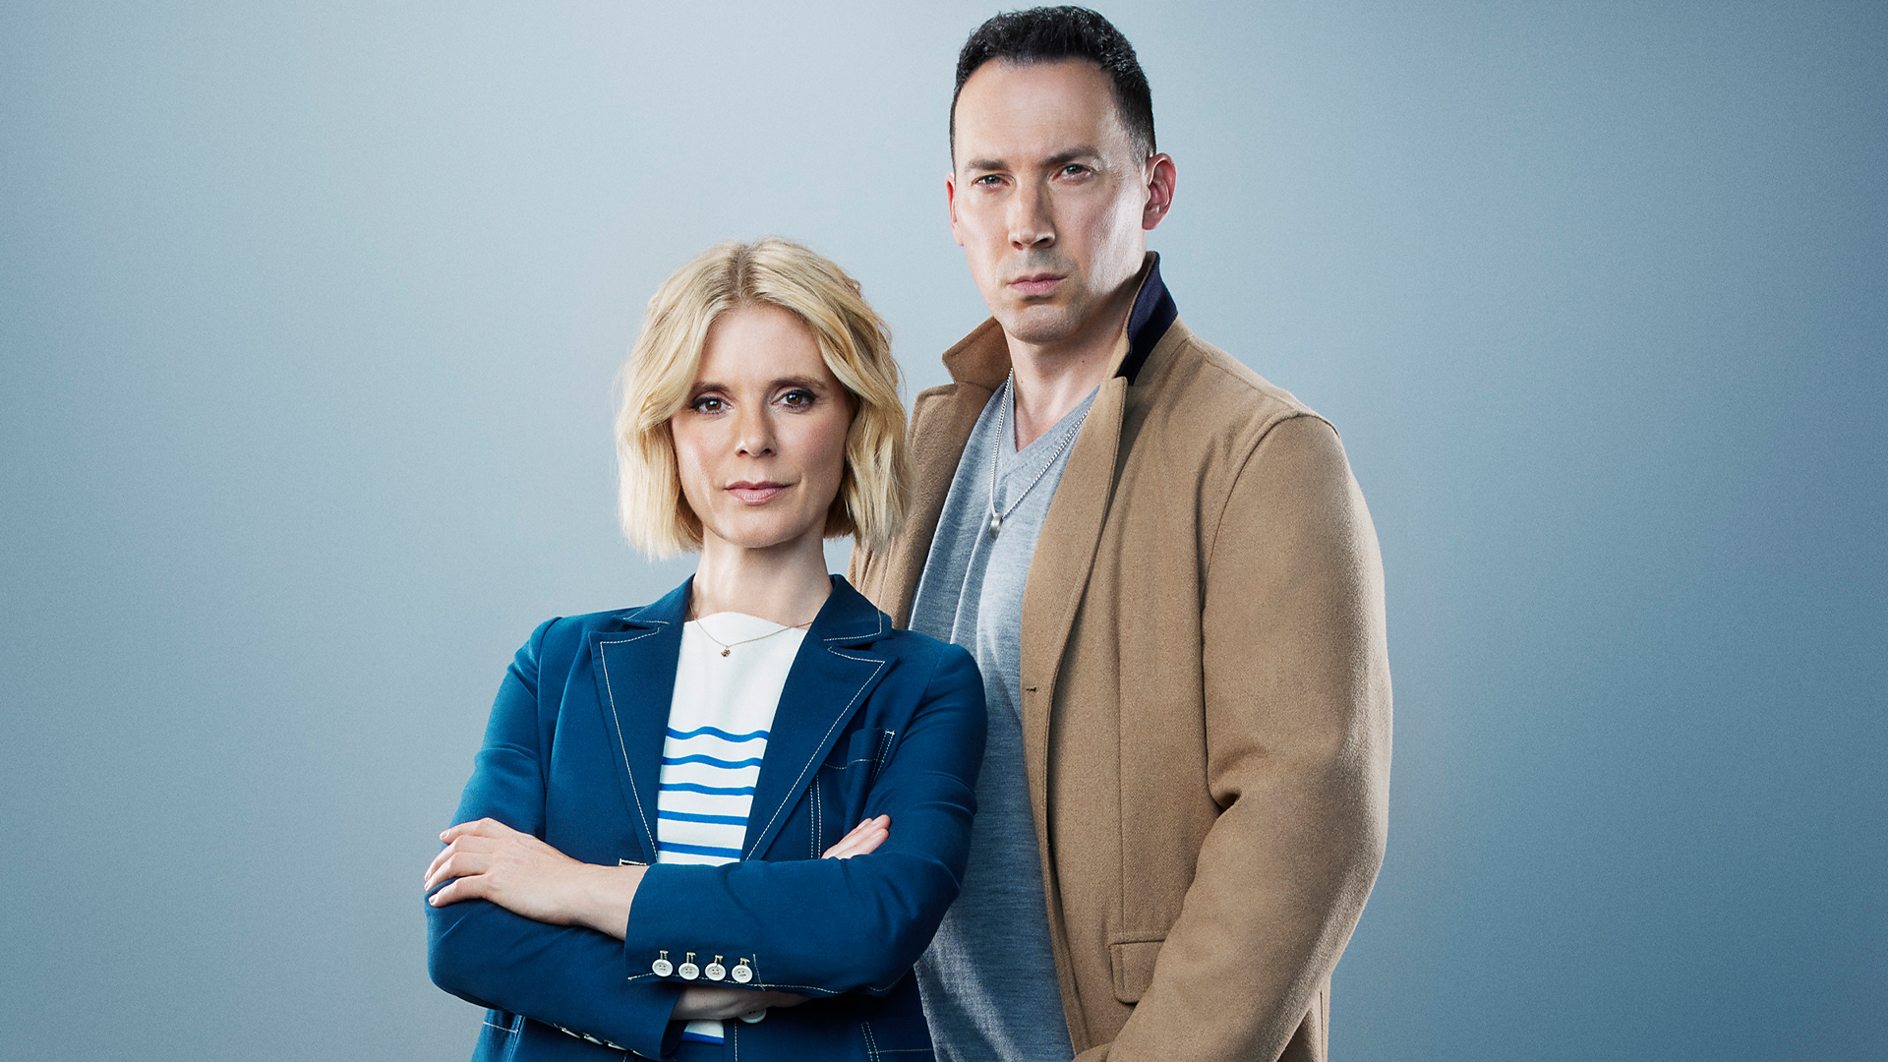 Silent Witness series 27 - what happens - starts January 8